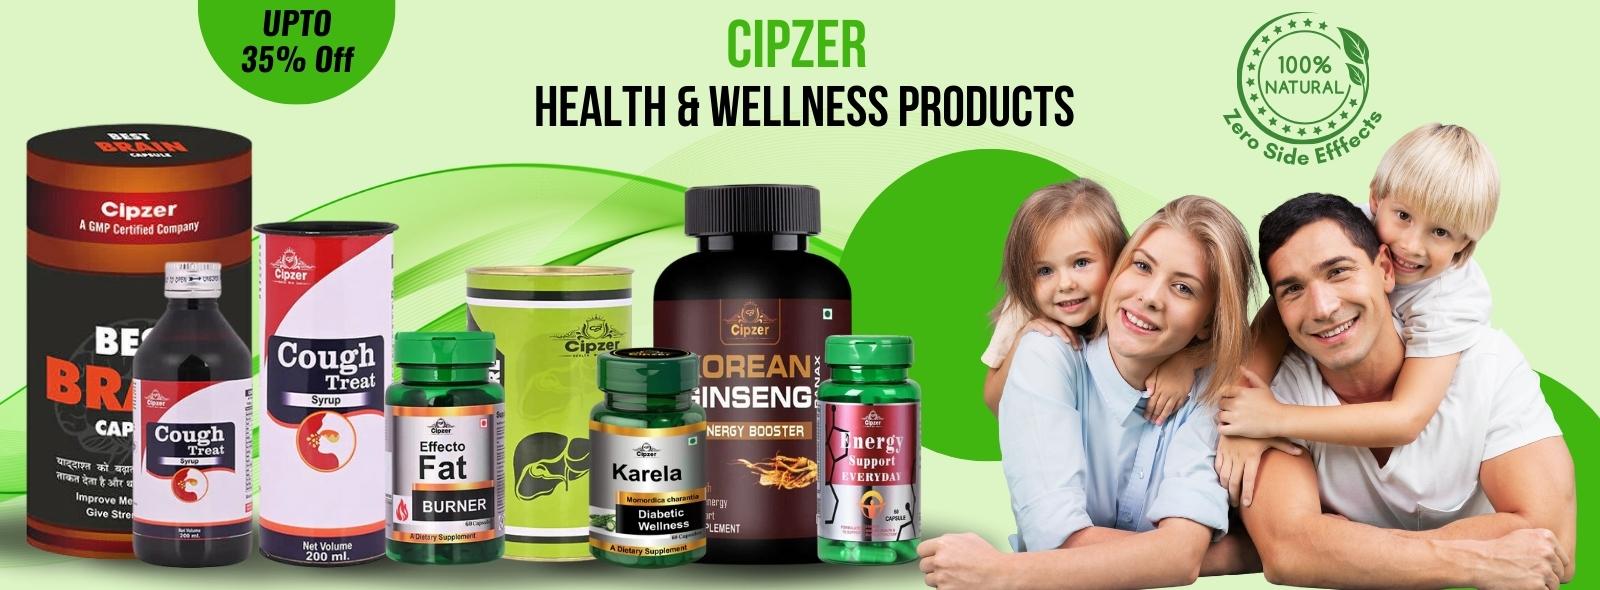 Cipzer Brand Products